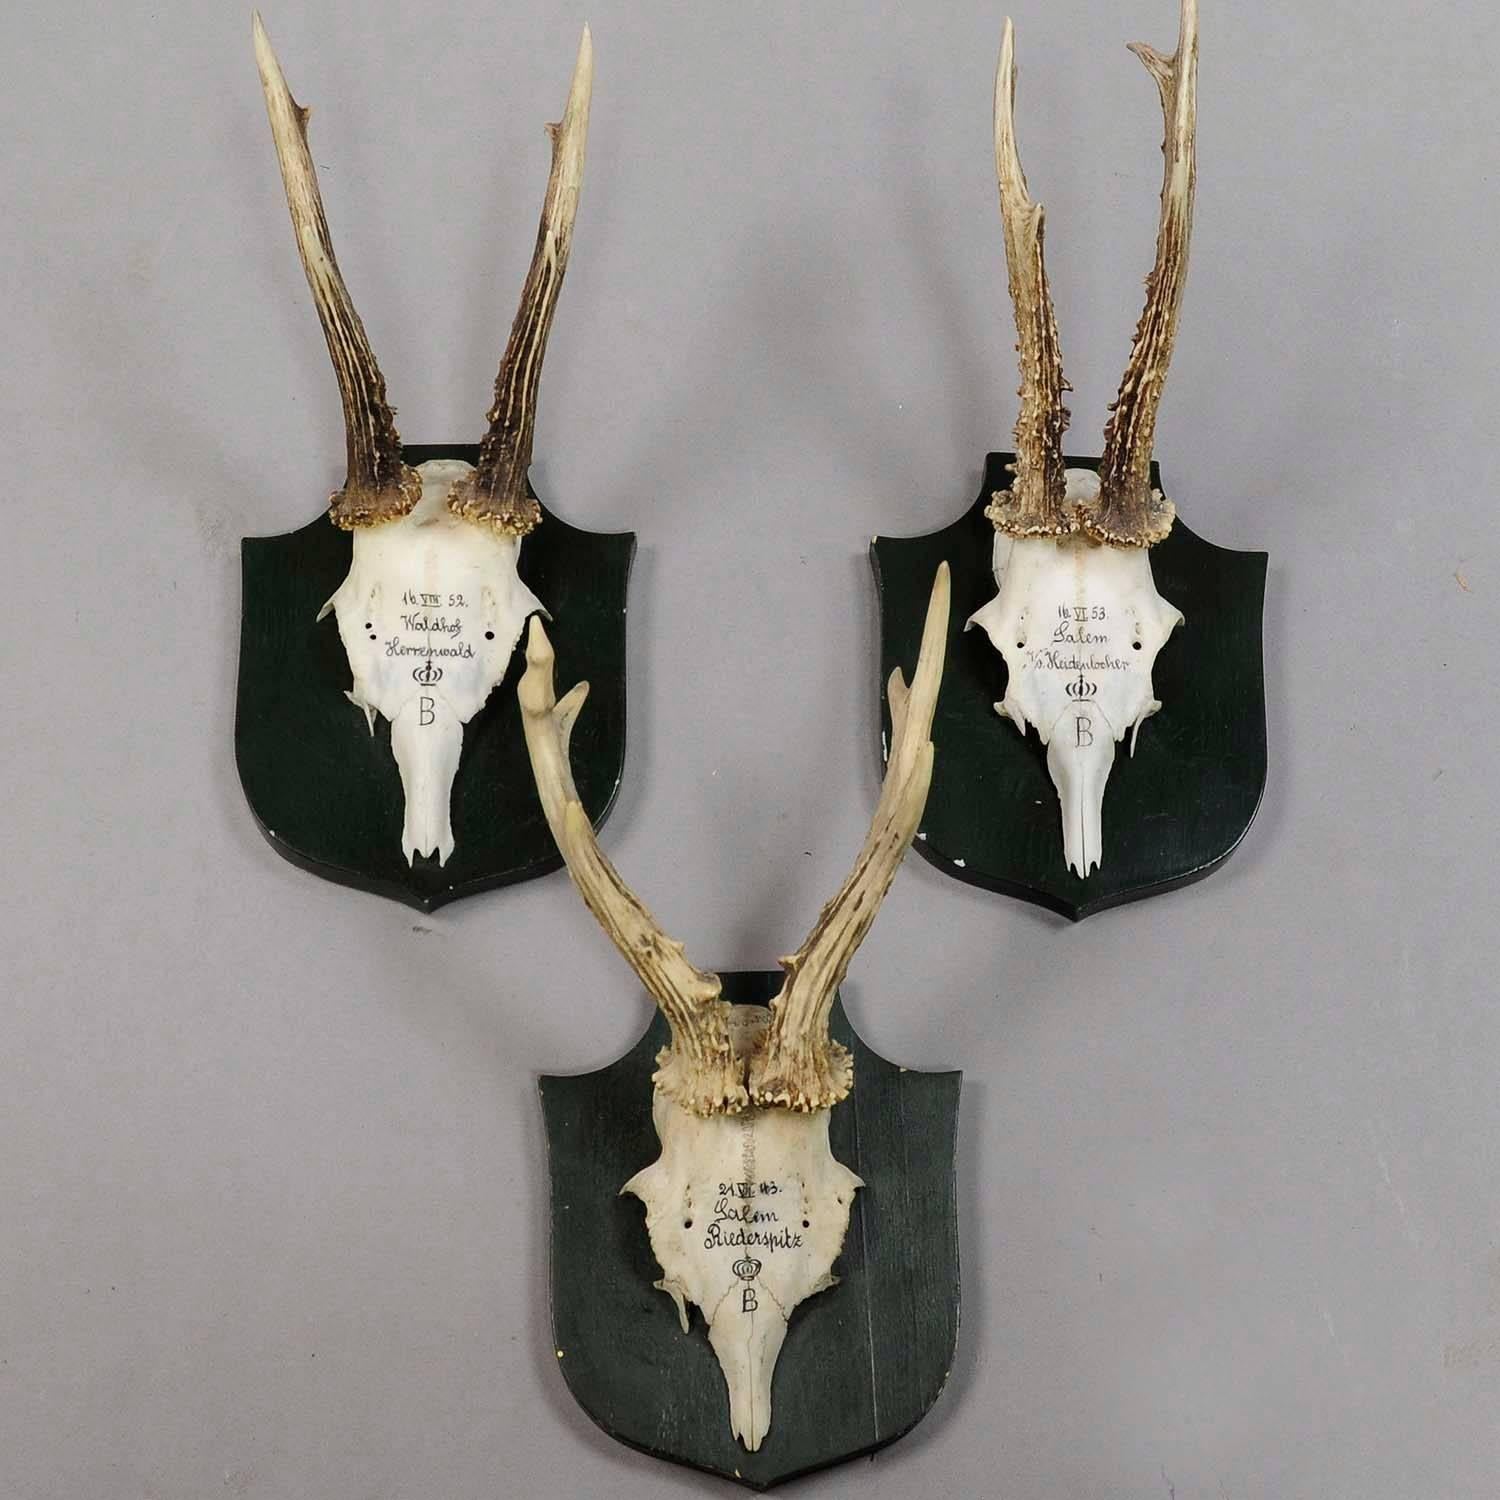 A set of six antique Black Forest deer trophies on wooden plaques. Remaining from the stately home of palace salem in south Germany. All trophies were shot by members of the family of margrave maximilian of baden. Handwritten inscriptions on the